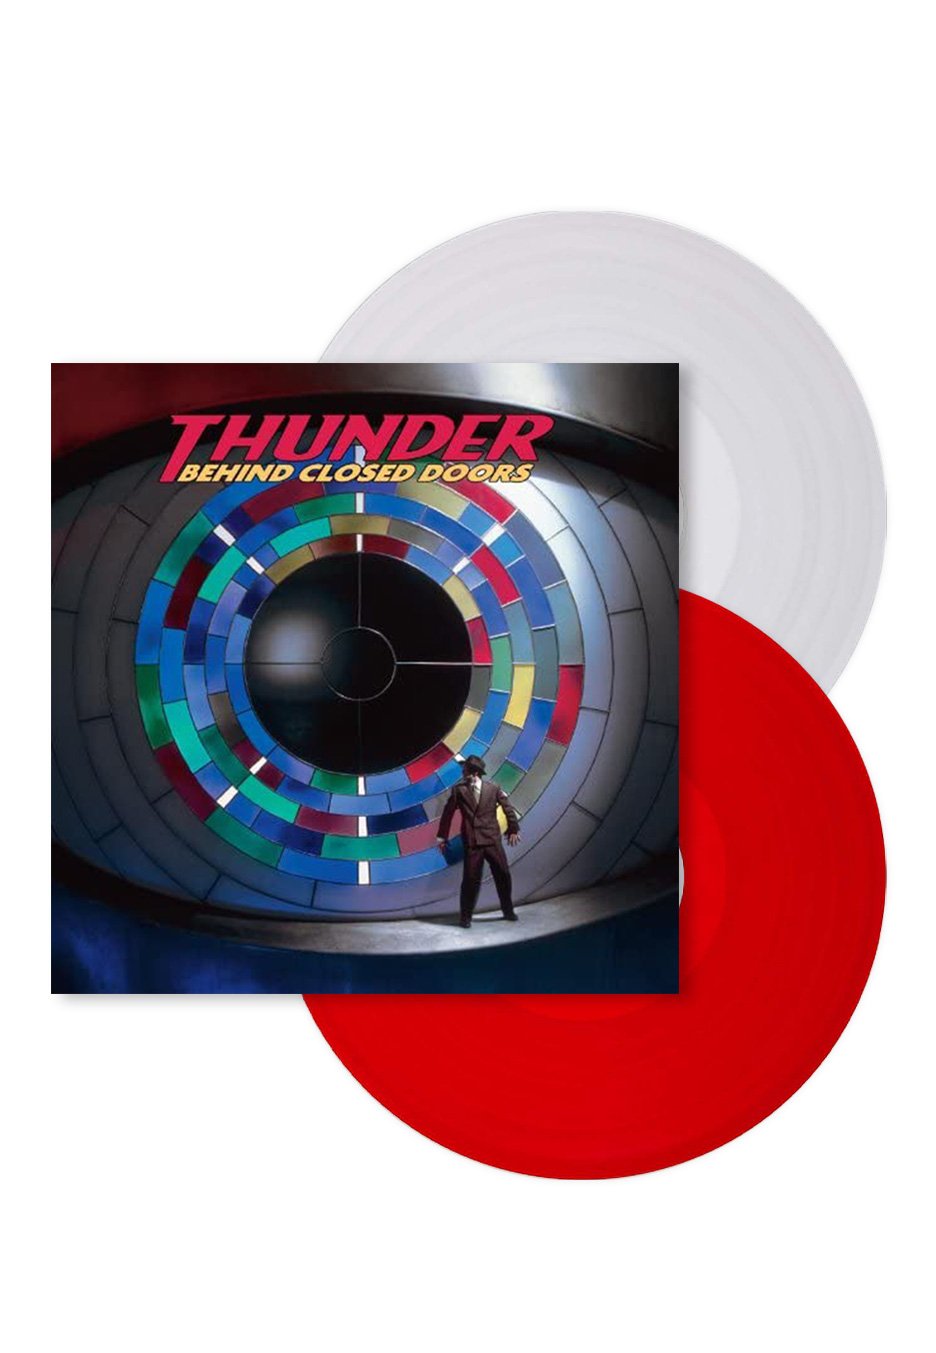 Thunder - Behind Closed Doors (Expanded Version) Ltd. Red + Clear - 2 Vinyl